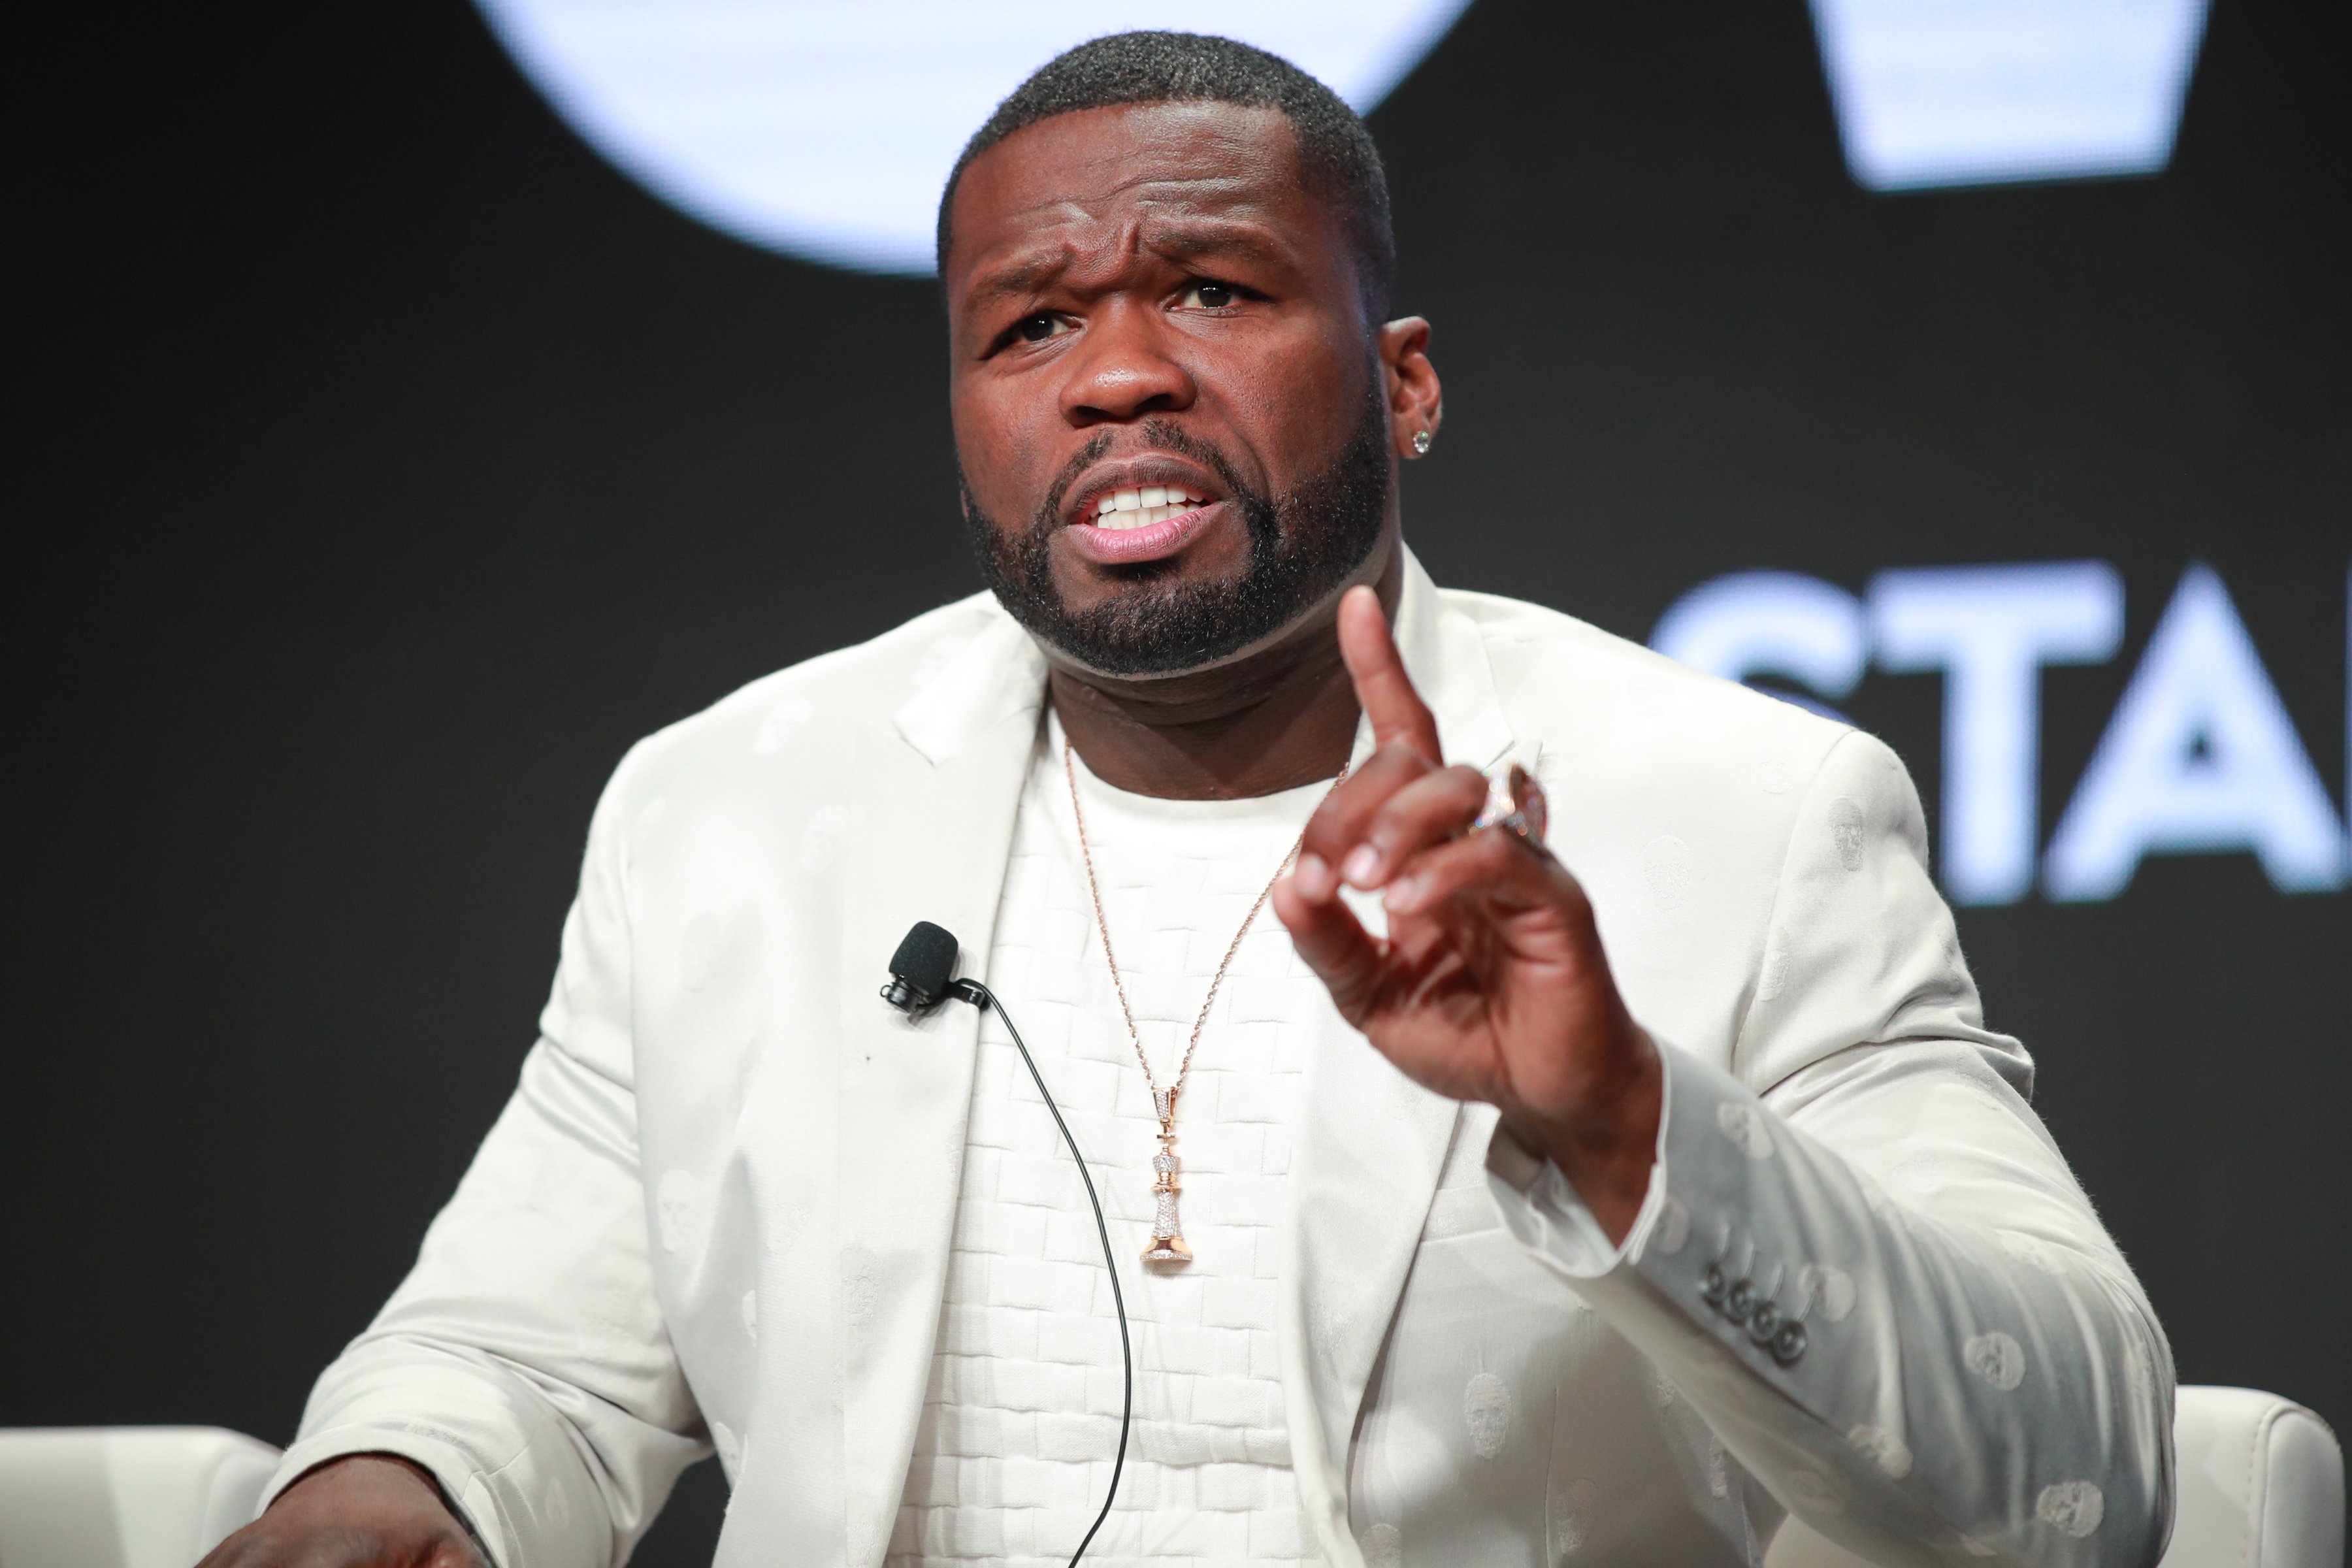 Curtis "50 Cent" Jackson at the Television Critics Association Press Tour on July 26, 2019 in Beverly Hills, California | Photo: Getty Images